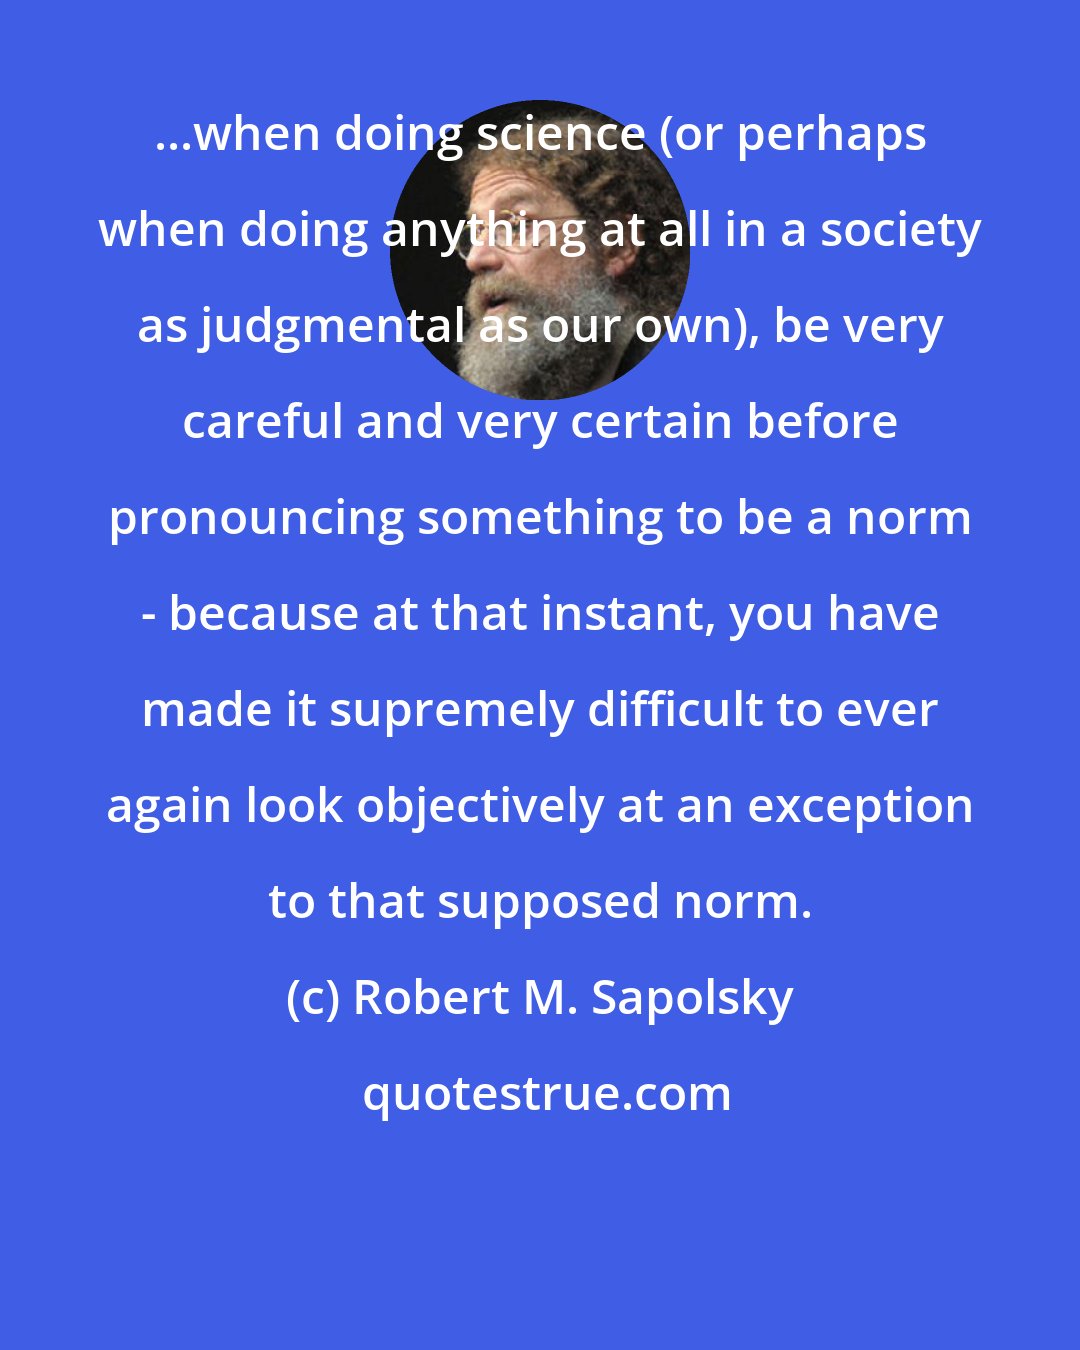 Robert M. Sapolsky: ...when doing science (or perhaps when doing anything at all in a society as judgmental as our own), be very careful and very certain before pronouncing something to be a norm - because at that instant, you have made it supremely difficult to ever again look objectively at an exception to that supposed norm.